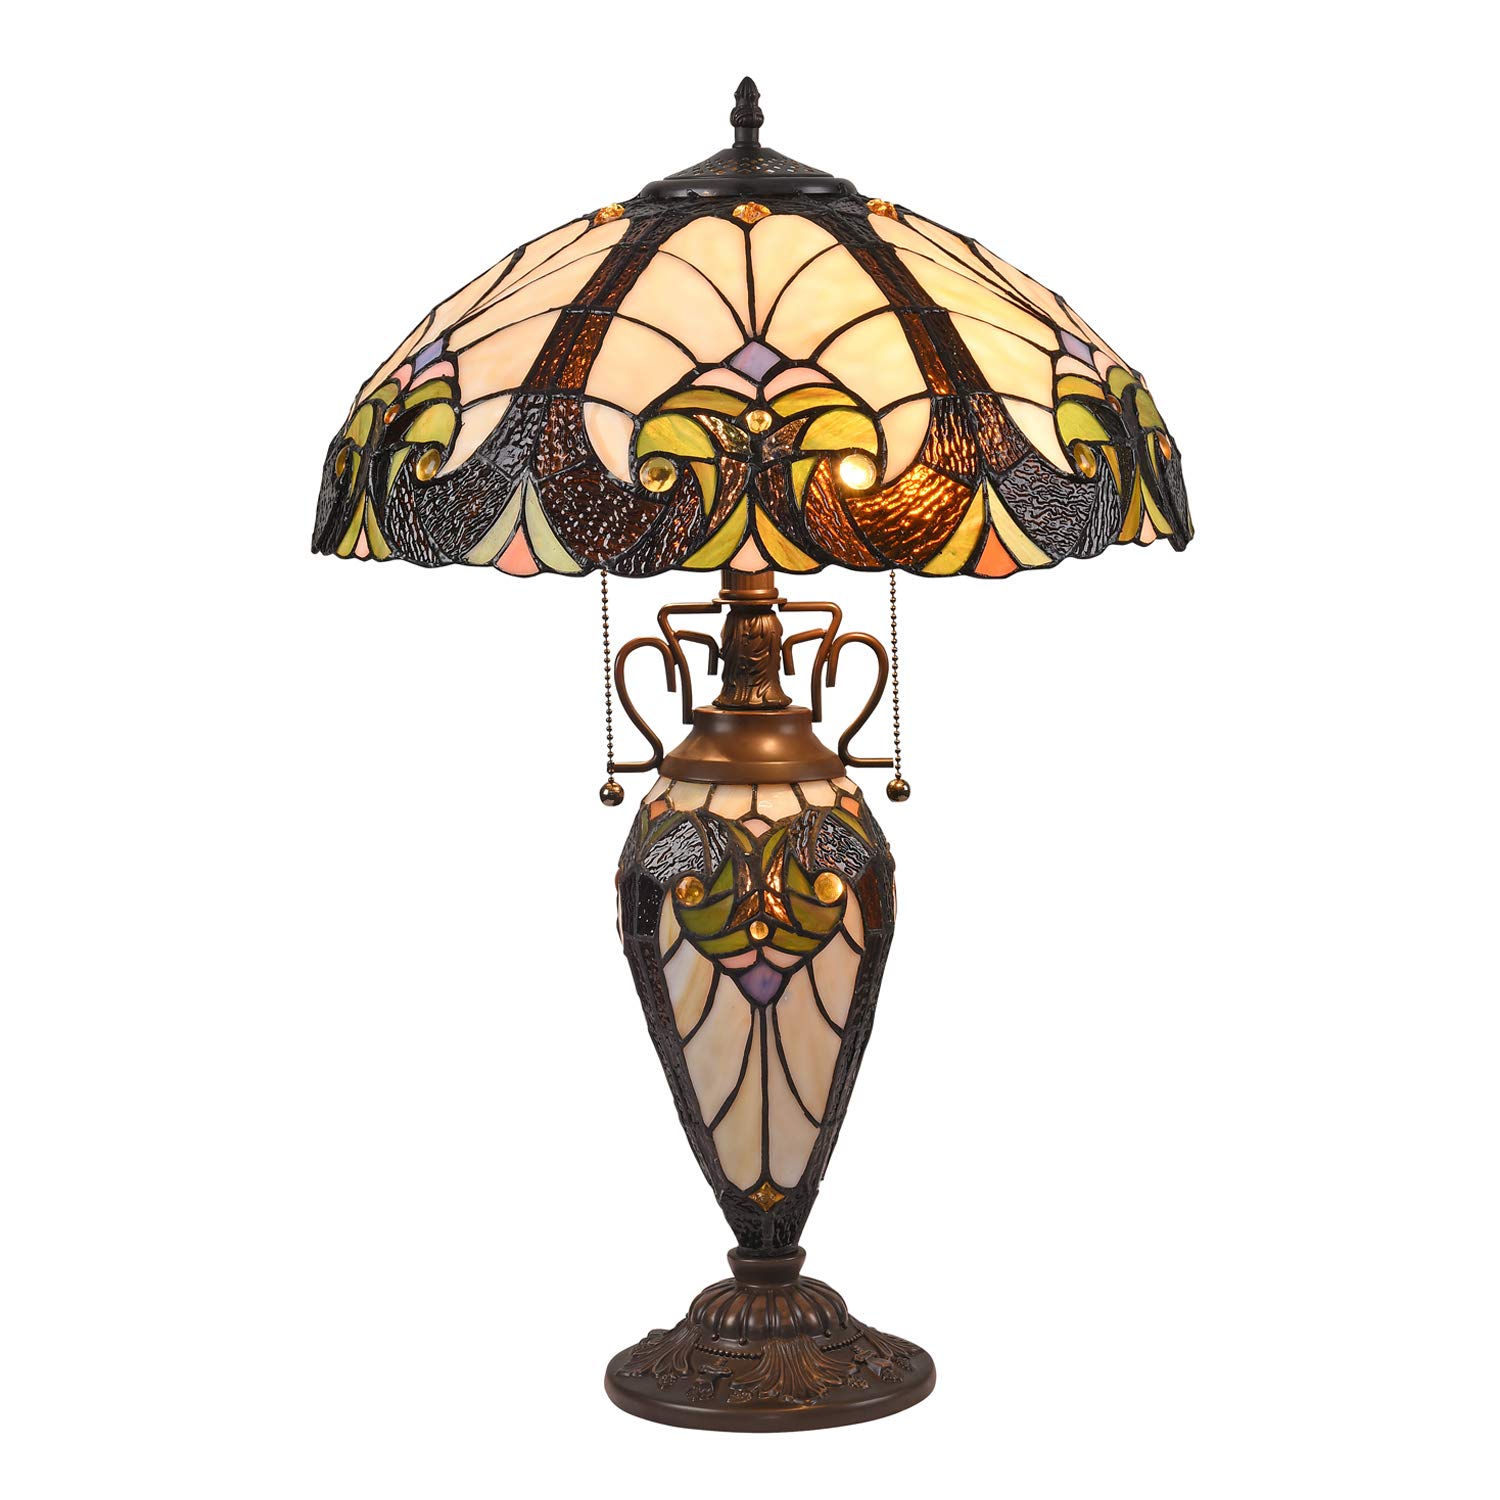 Cotoss Tiffany Table Lamp Night Light 16" Wide Handmade Stained Glass Lamp Shade 3 Light Amber Cream Victorian Style Vintage Table Lamp for Hom...